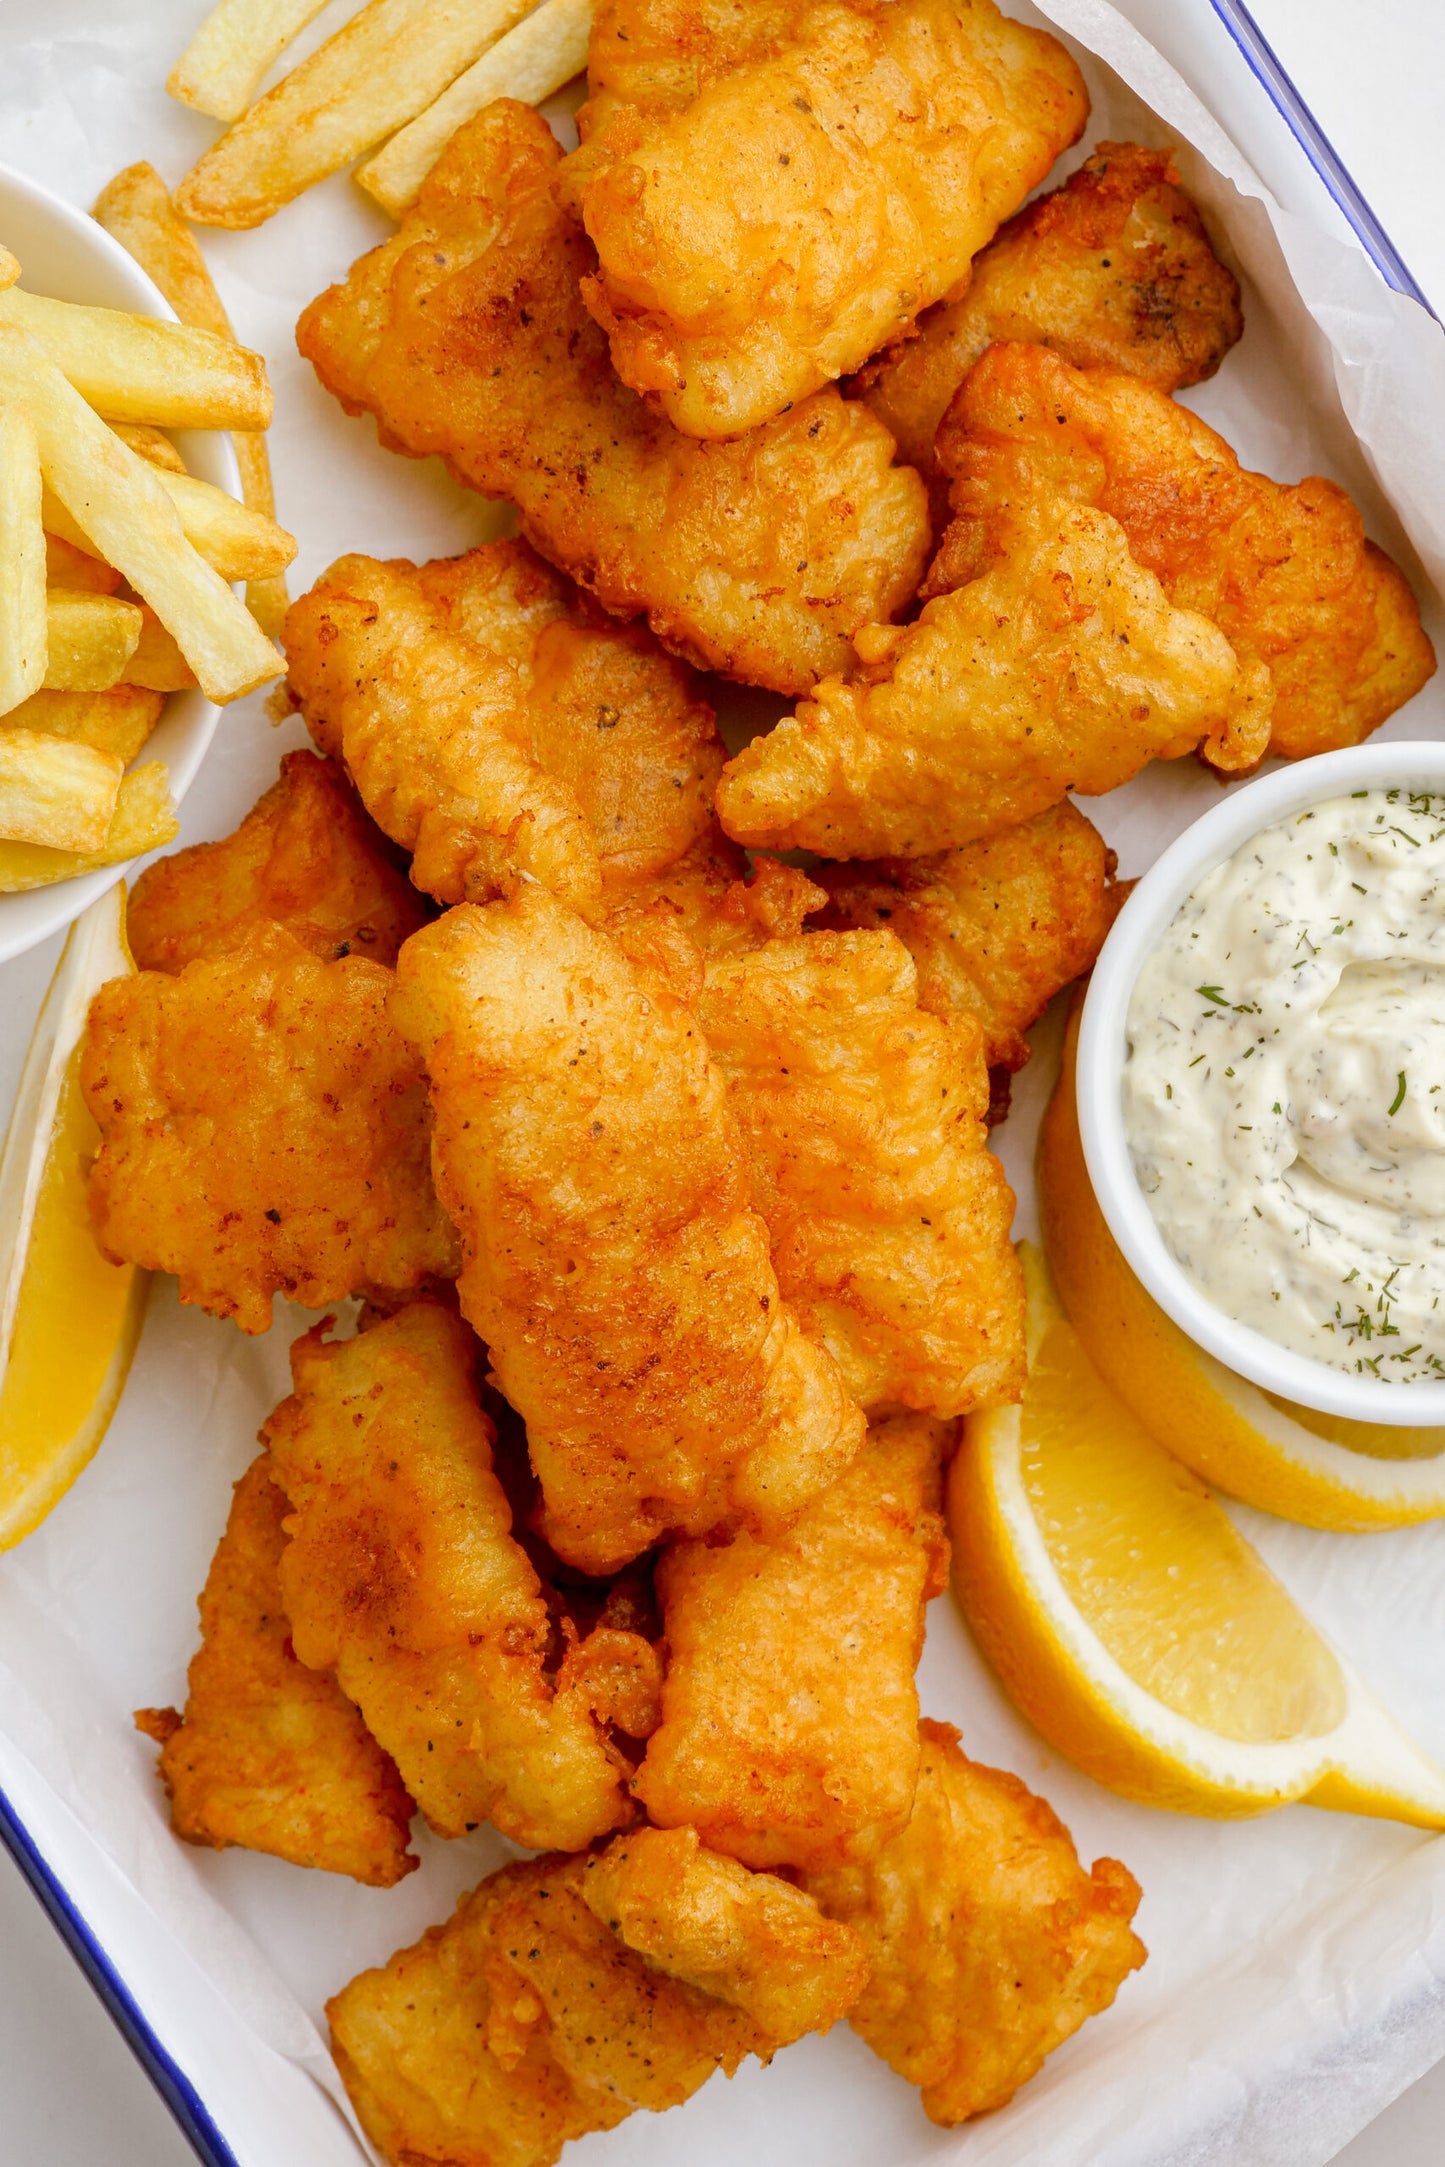 Fried Whiting Fillets (Combos)